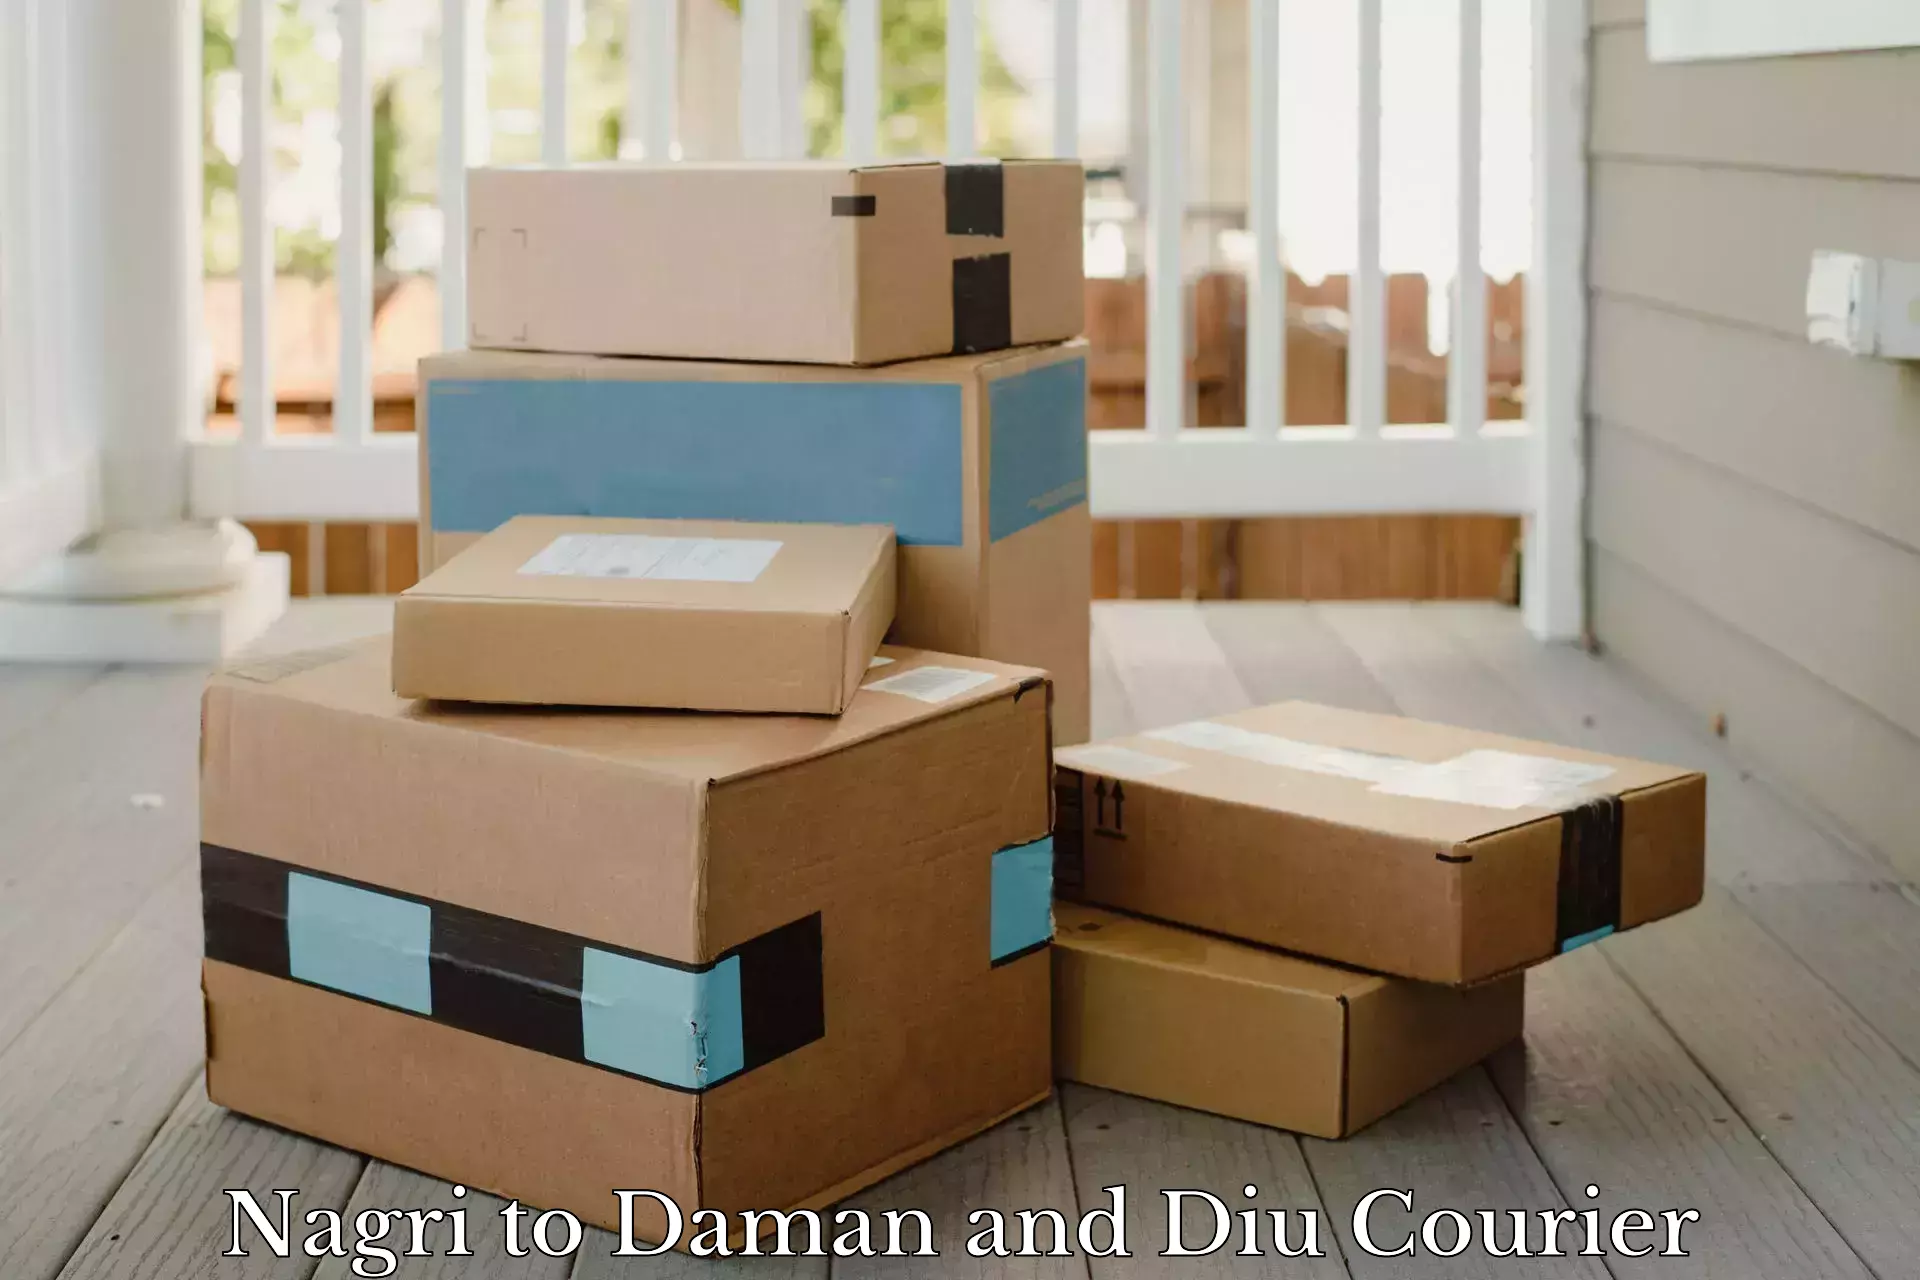 Courier service innovation in Nagri to Daman